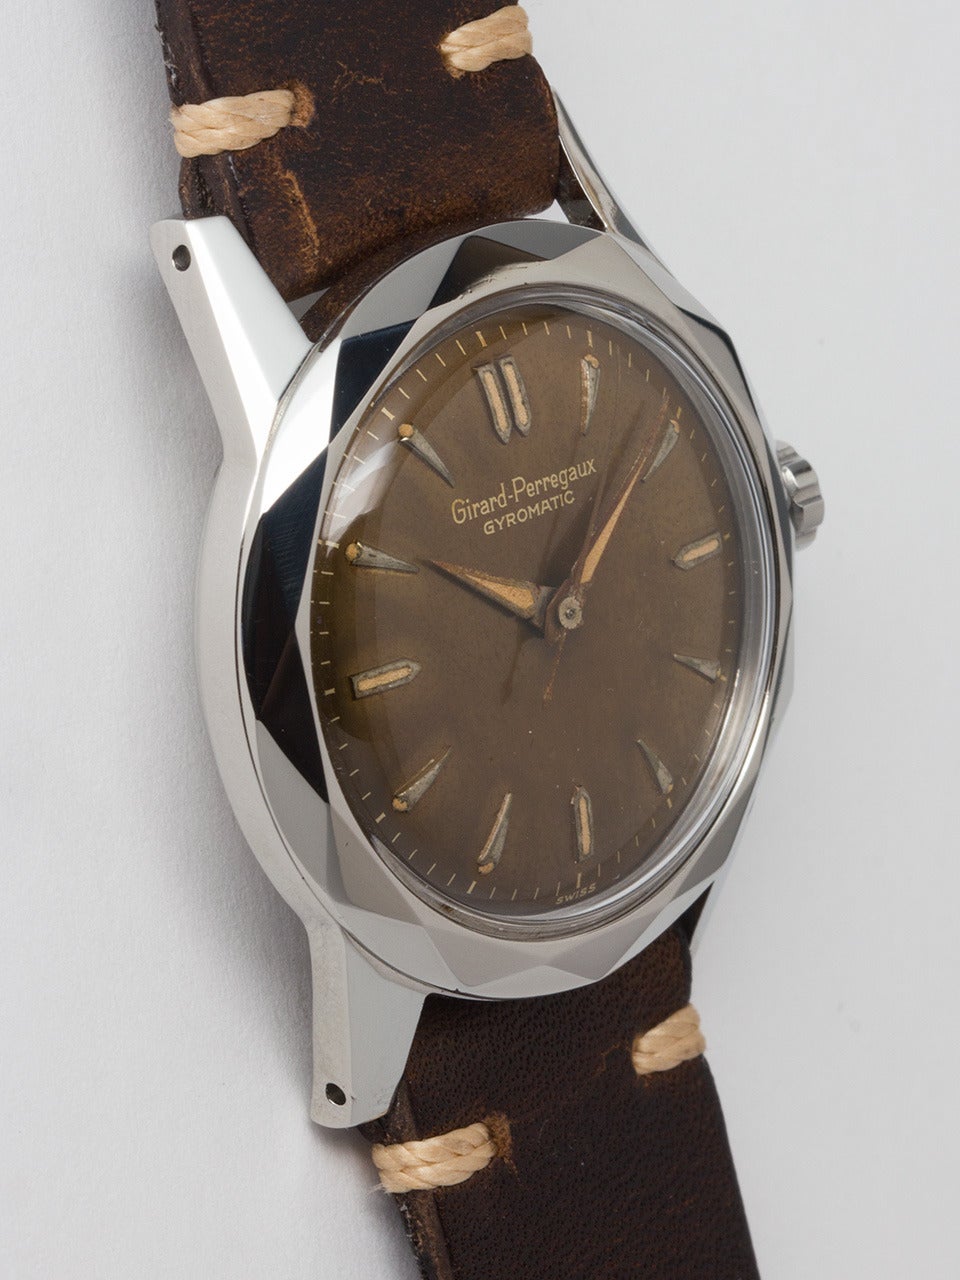 Girard Perregaux Stainless Steel Gyromatic Wristwatch circa 1950s. Medium sized 32 X 38mm screw back case with complex faceted bezel and signed GP crown. Distinctive chocolate color change dial with raised teardrop indexes and tapered luminous